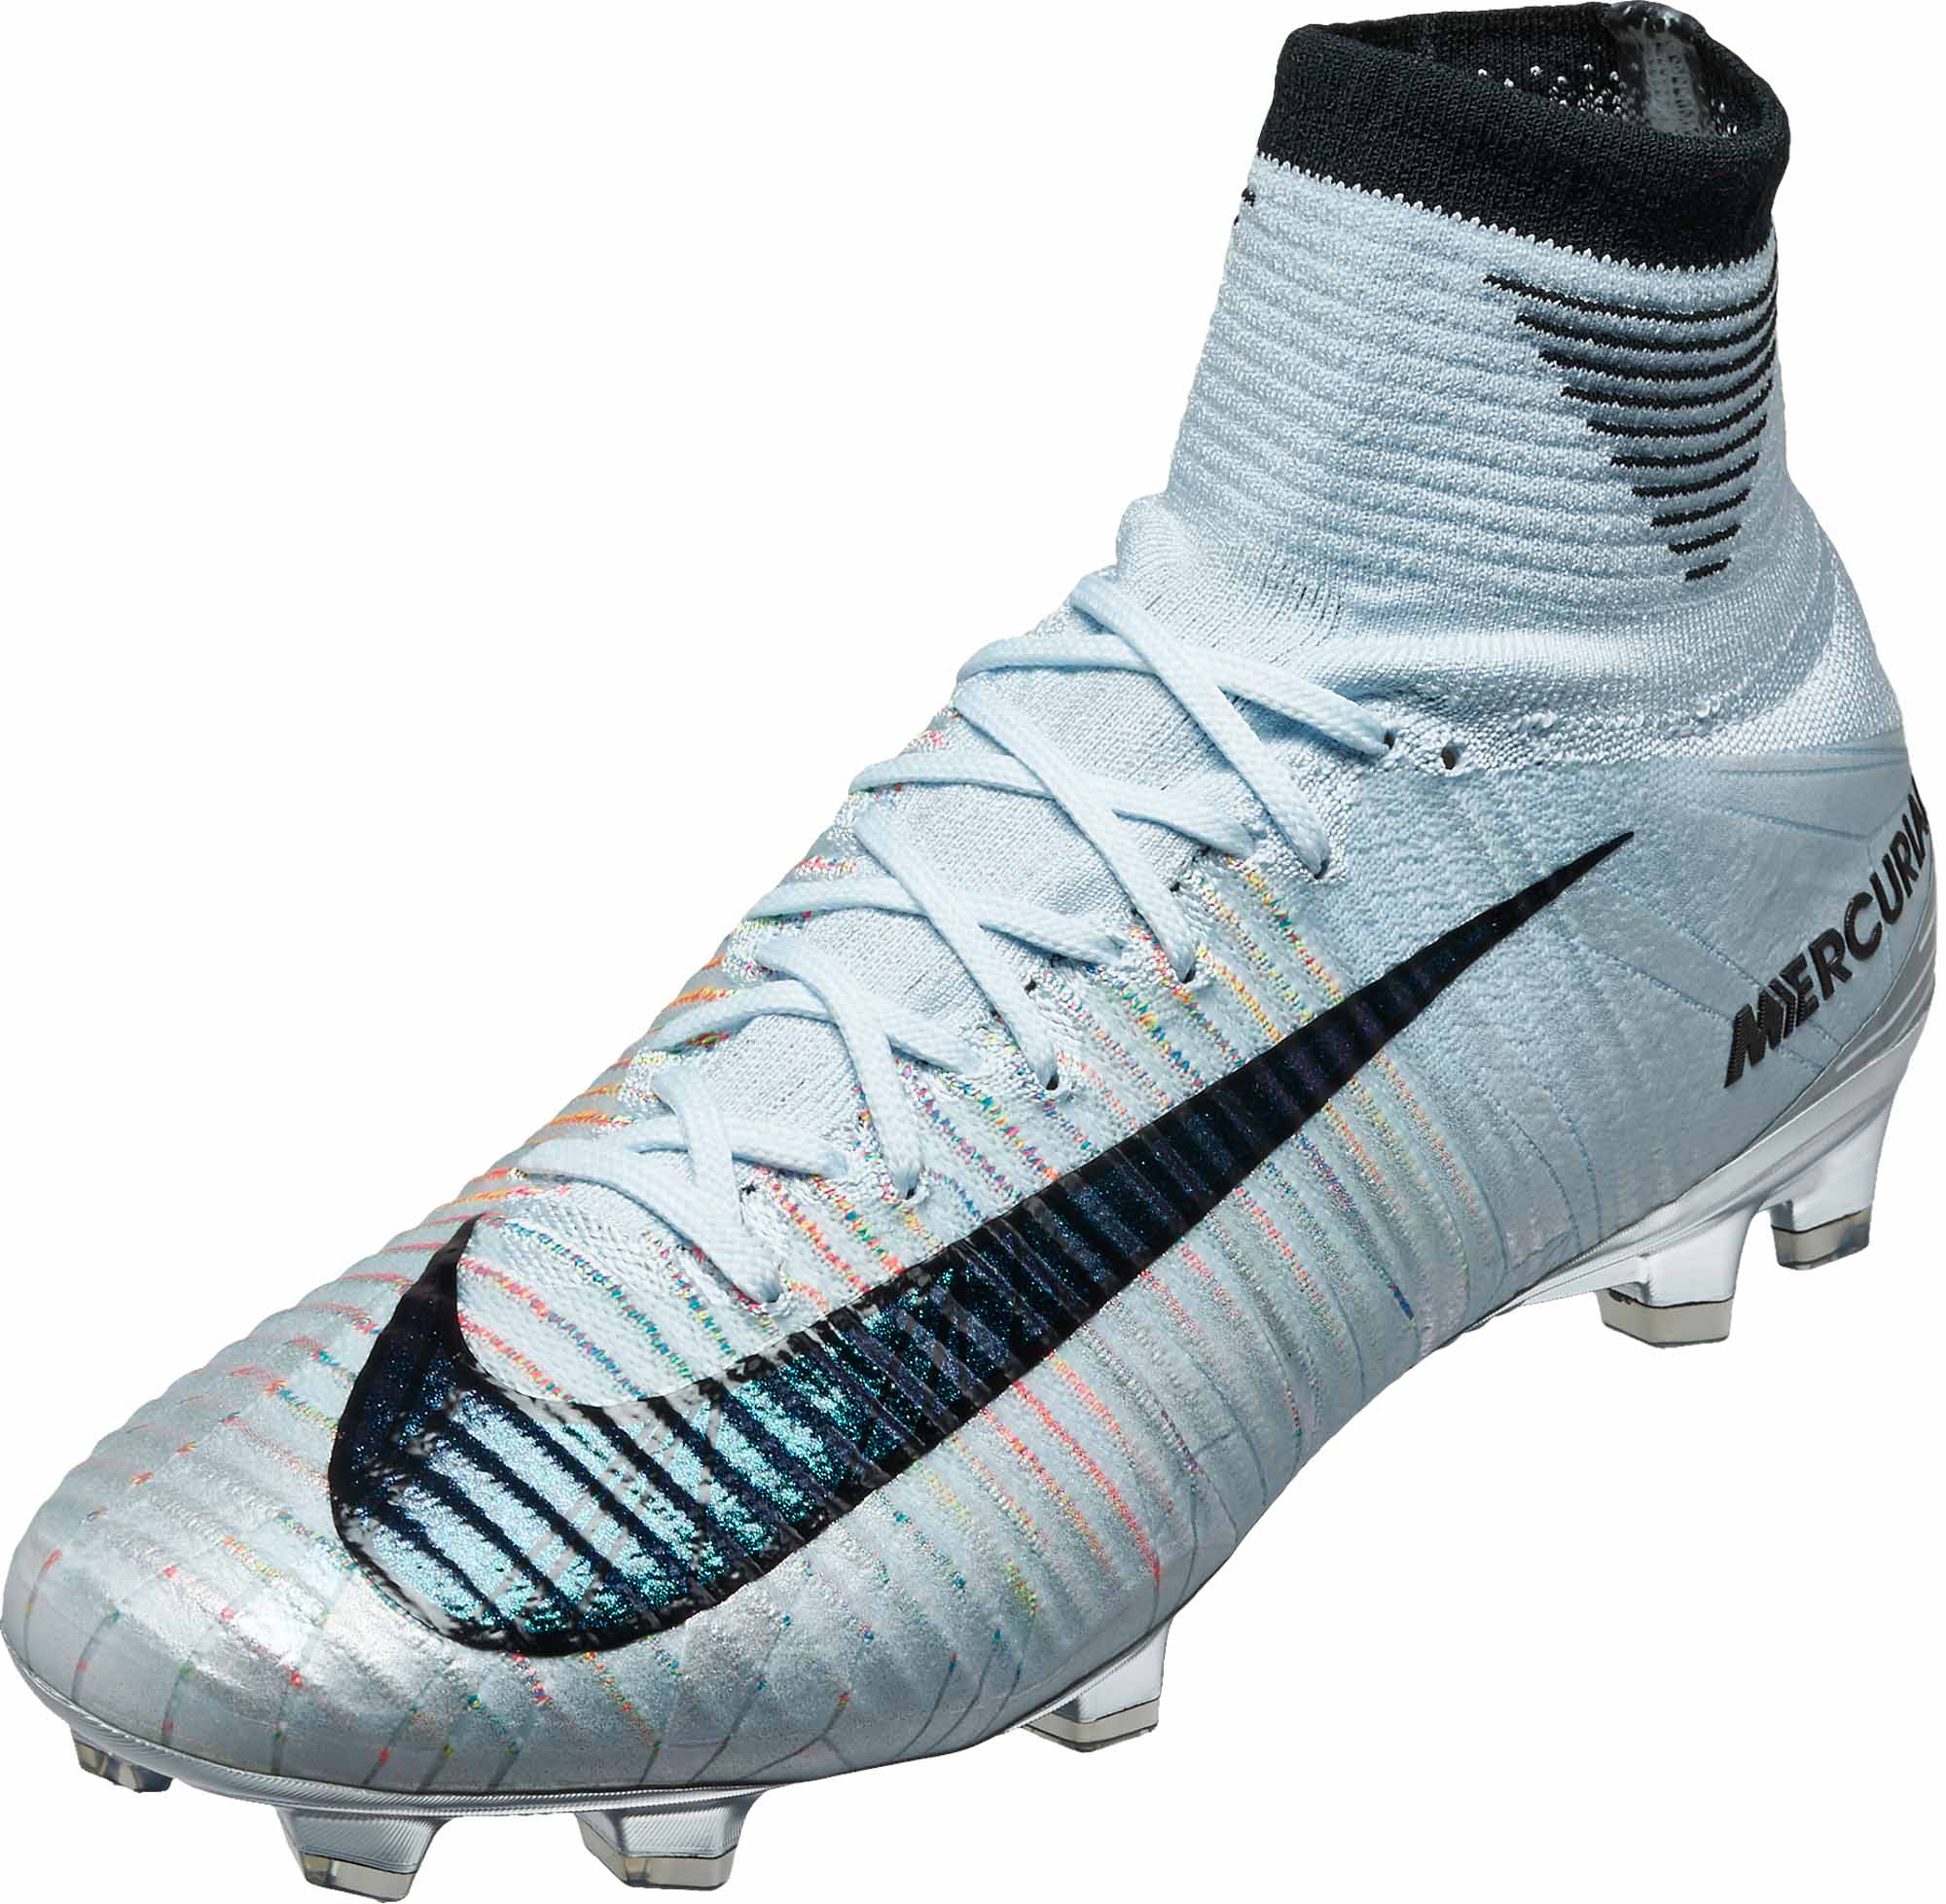 White Gold Cr7 Shoes Online